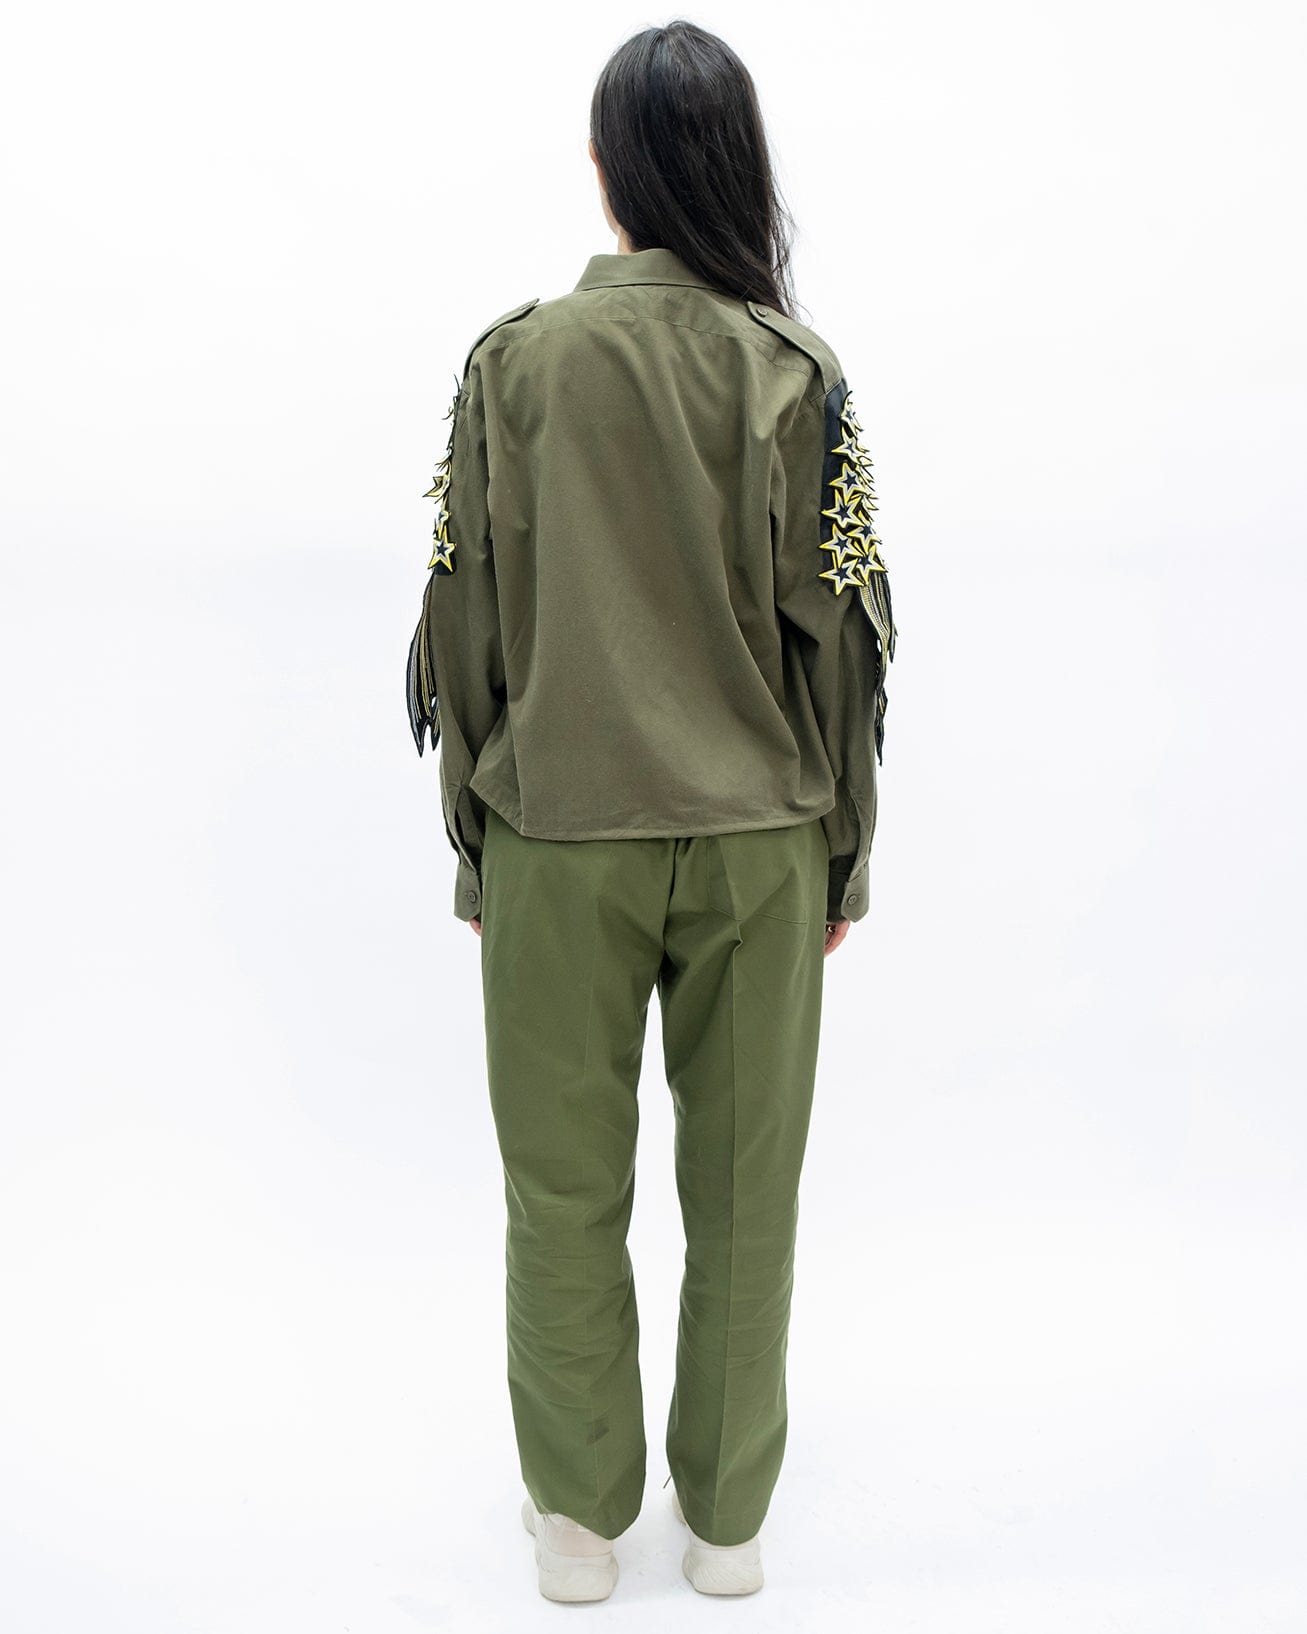 Star Arm Cropped Military Shirt